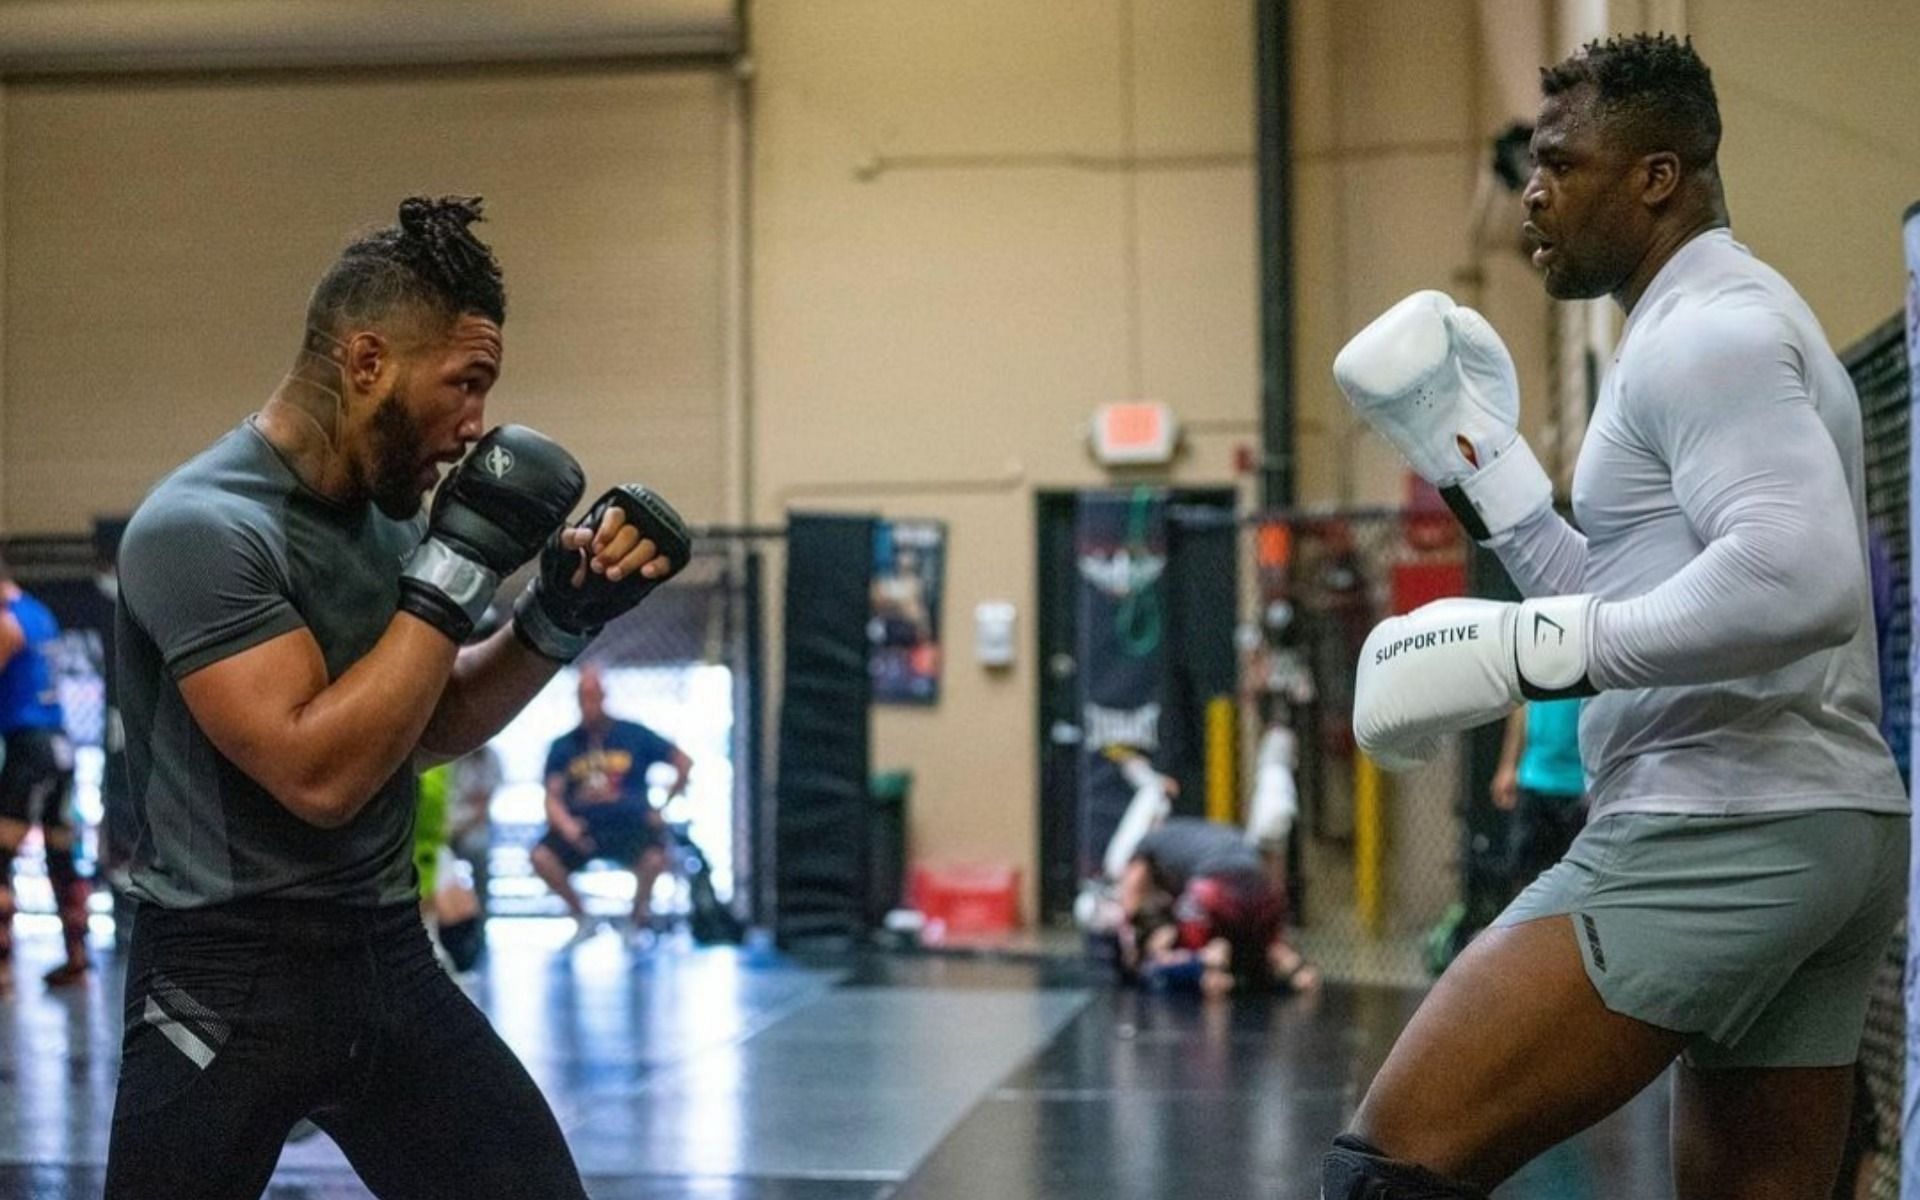 Kevin Lee (left) sparring with Francis Ngannou (right) in Las Vegas, Nevada